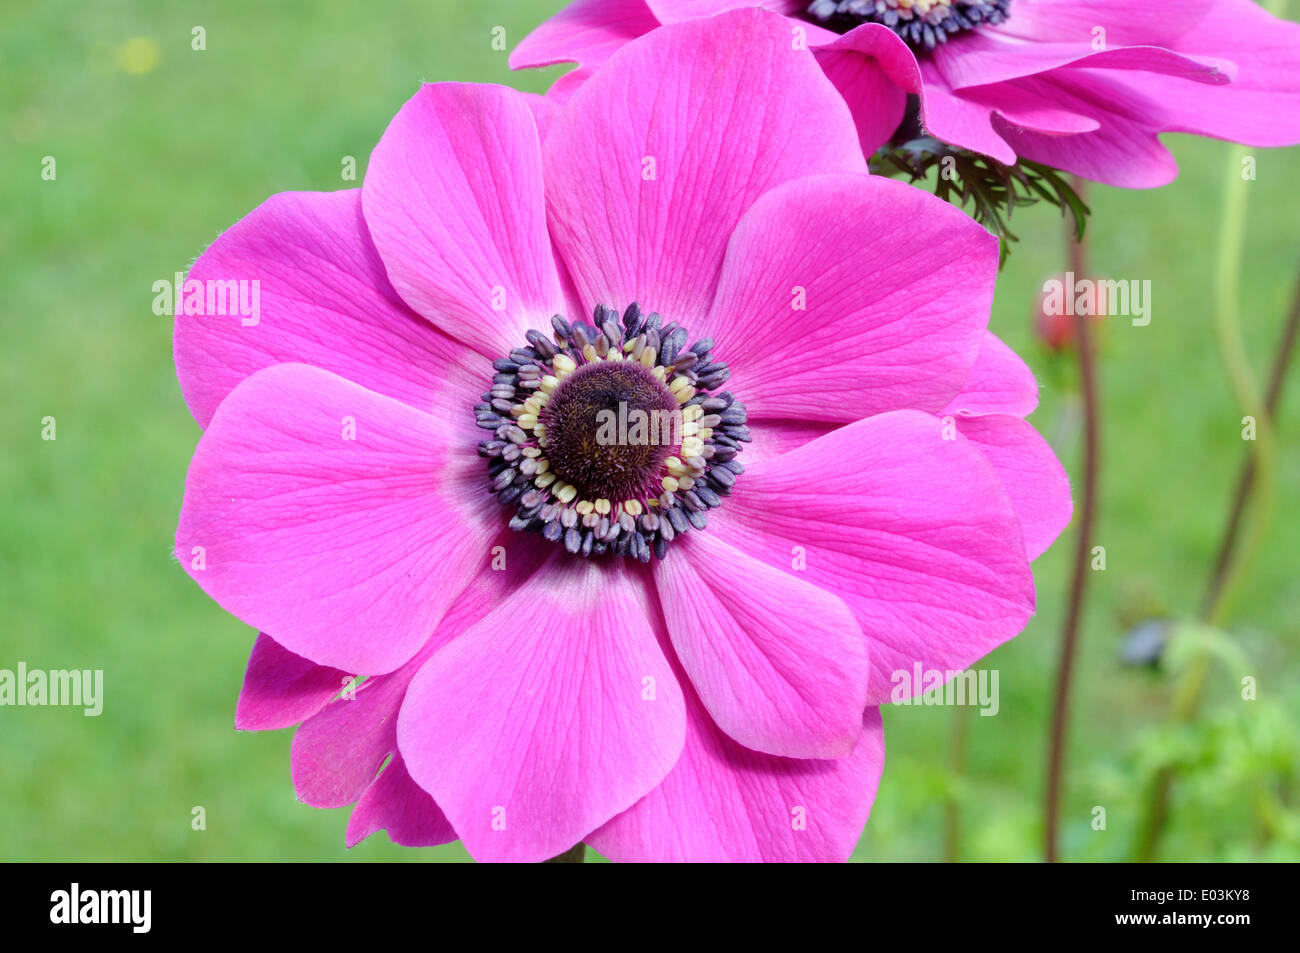 Close up of bright pink Anemone flower Stock Photo